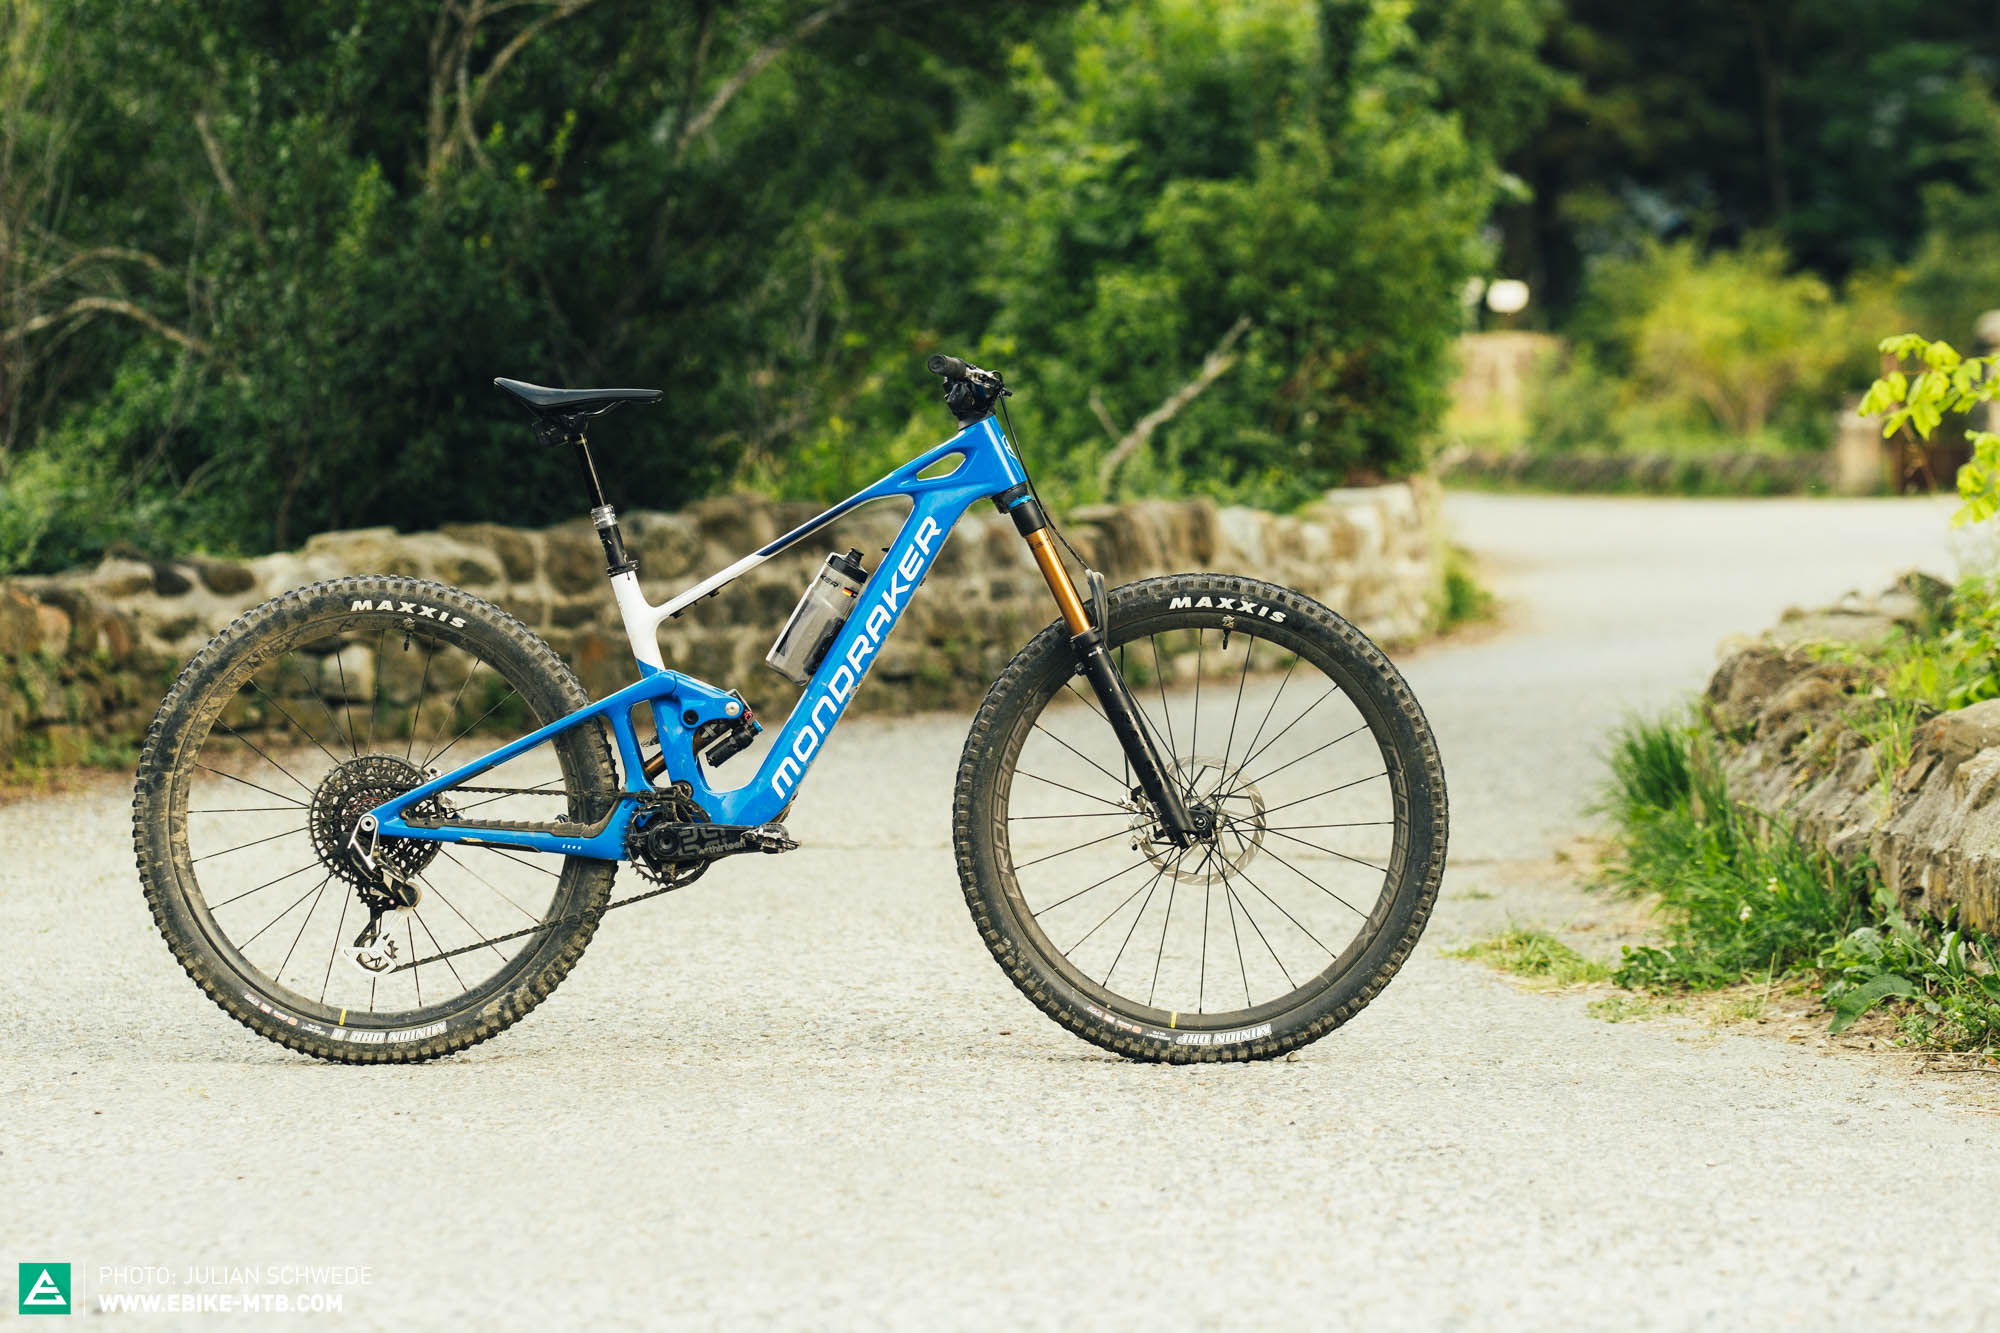 Mondraker NEAT RR SL 2023 with TQ HPR50 Motor on test – The Spanish performance manufacturer’s first light eMTB